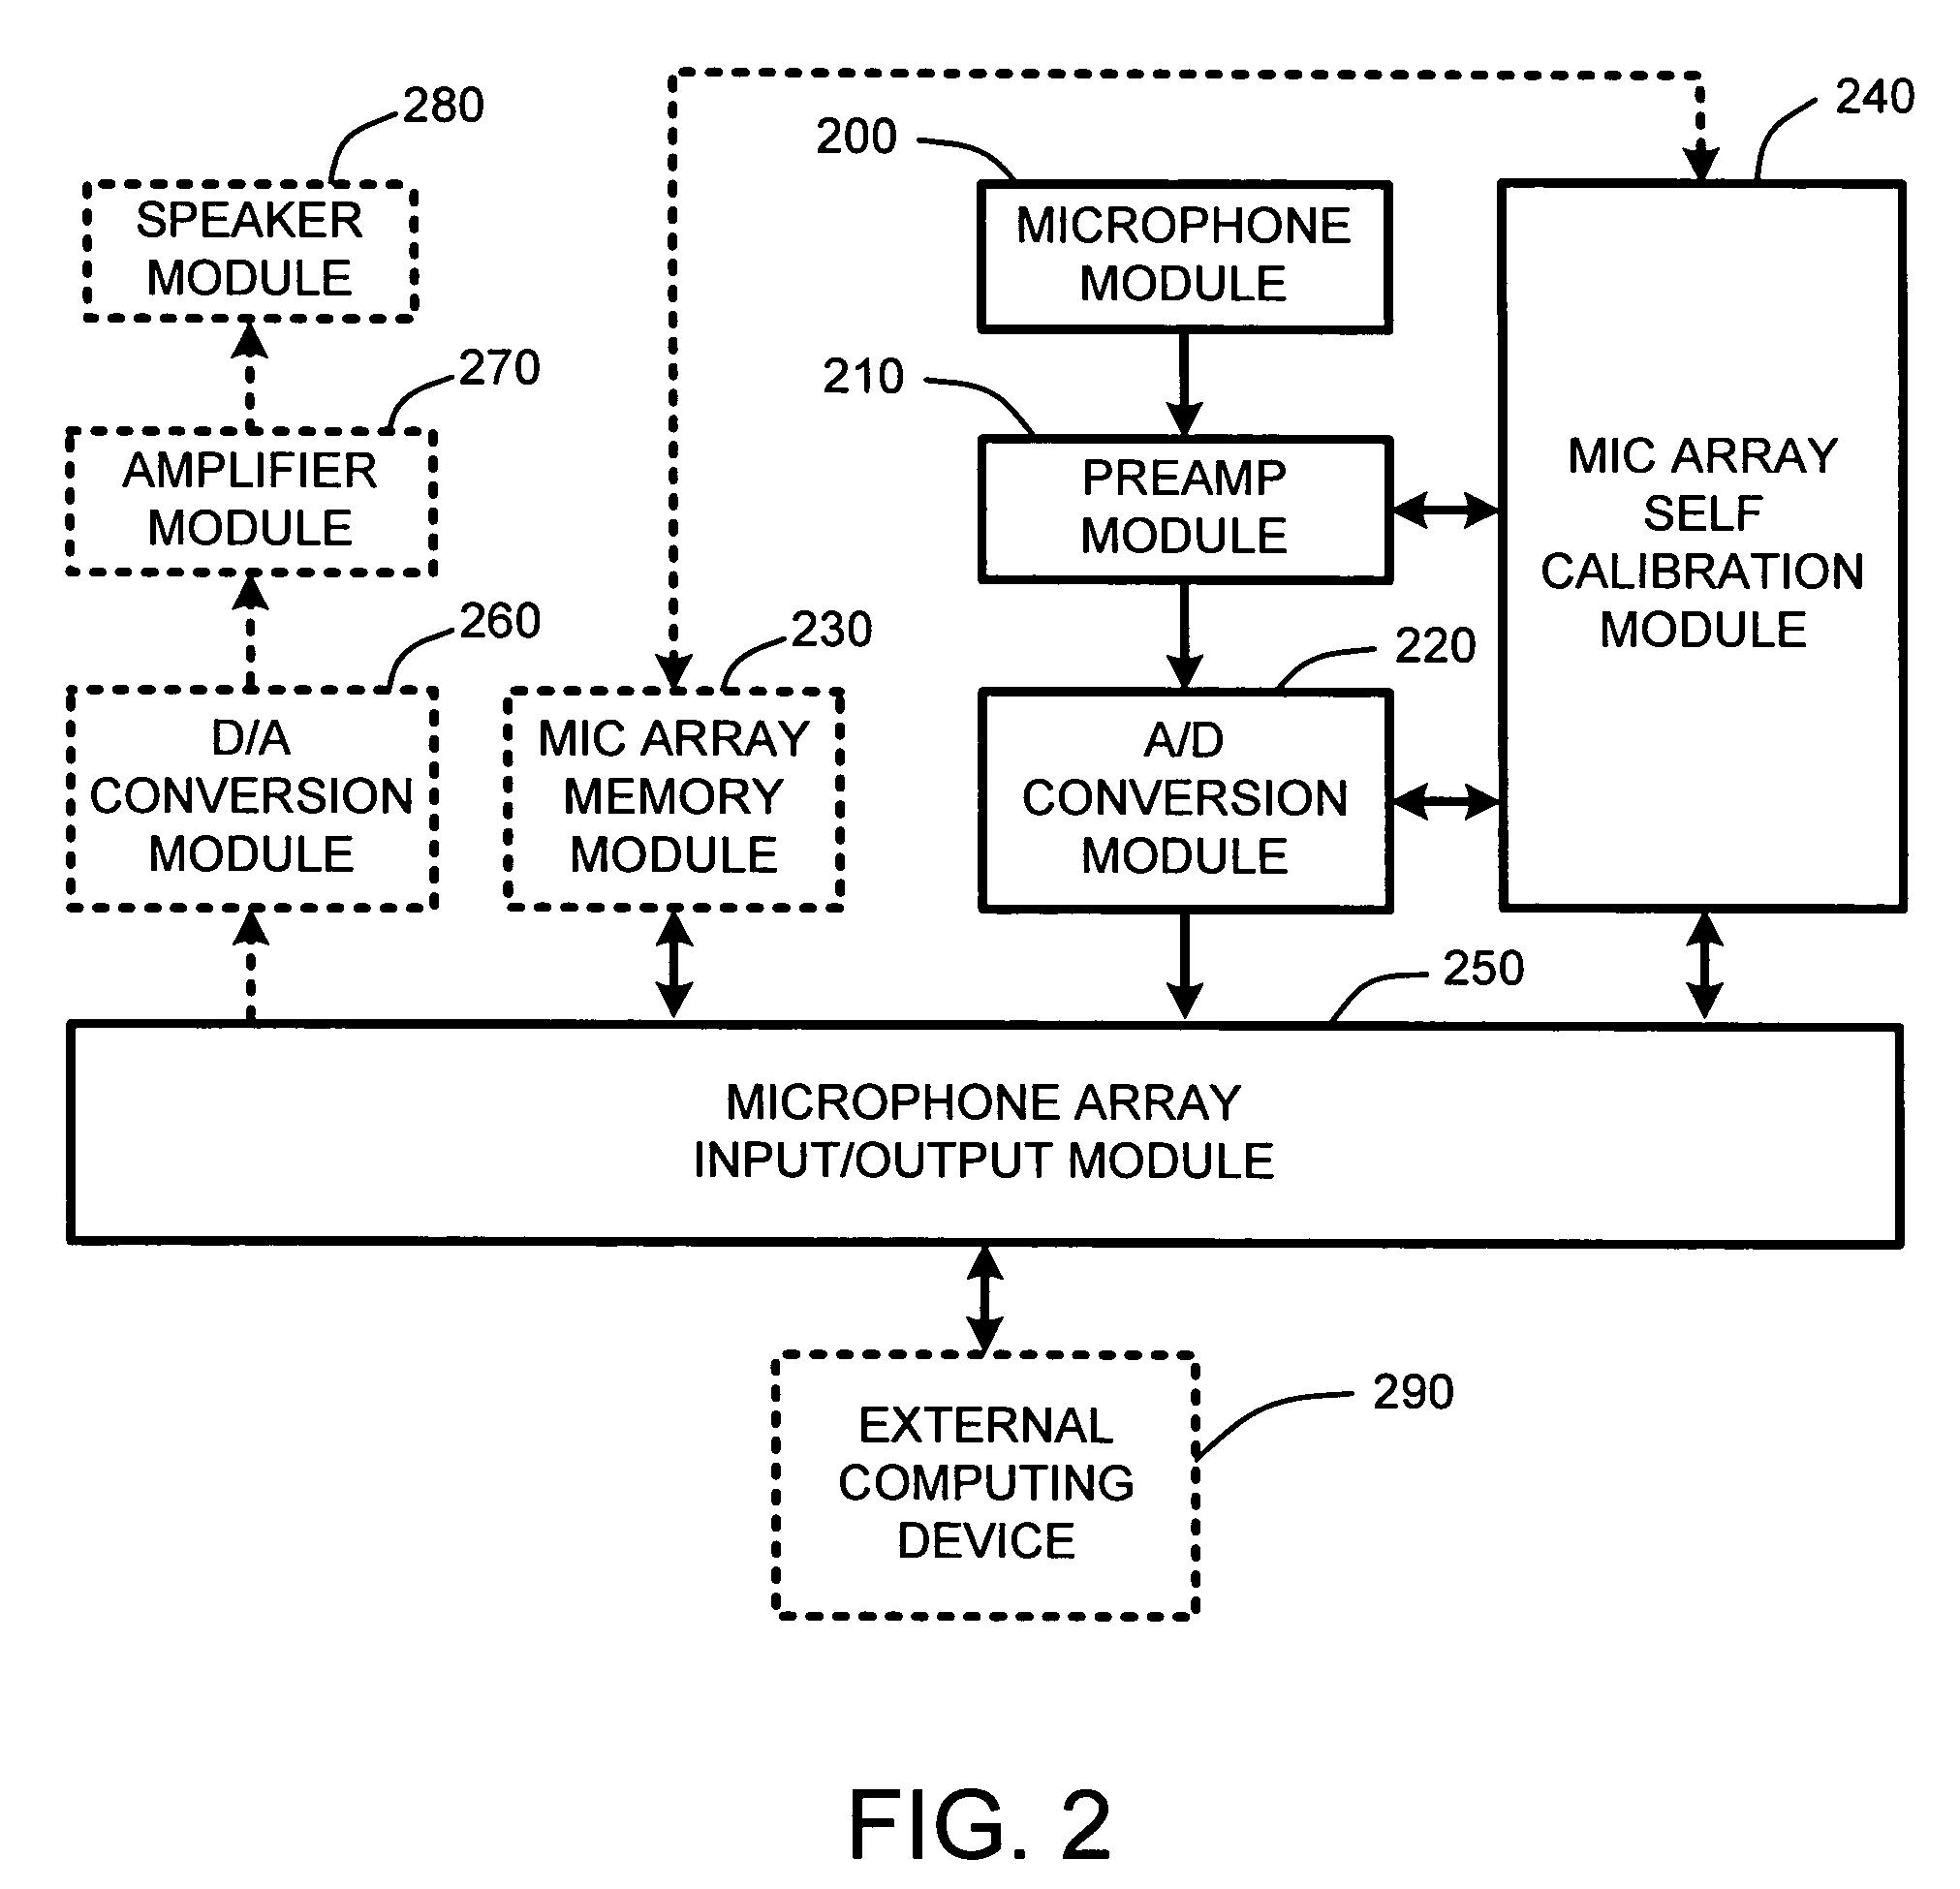 Analog preamplifier measurement for a microphone array